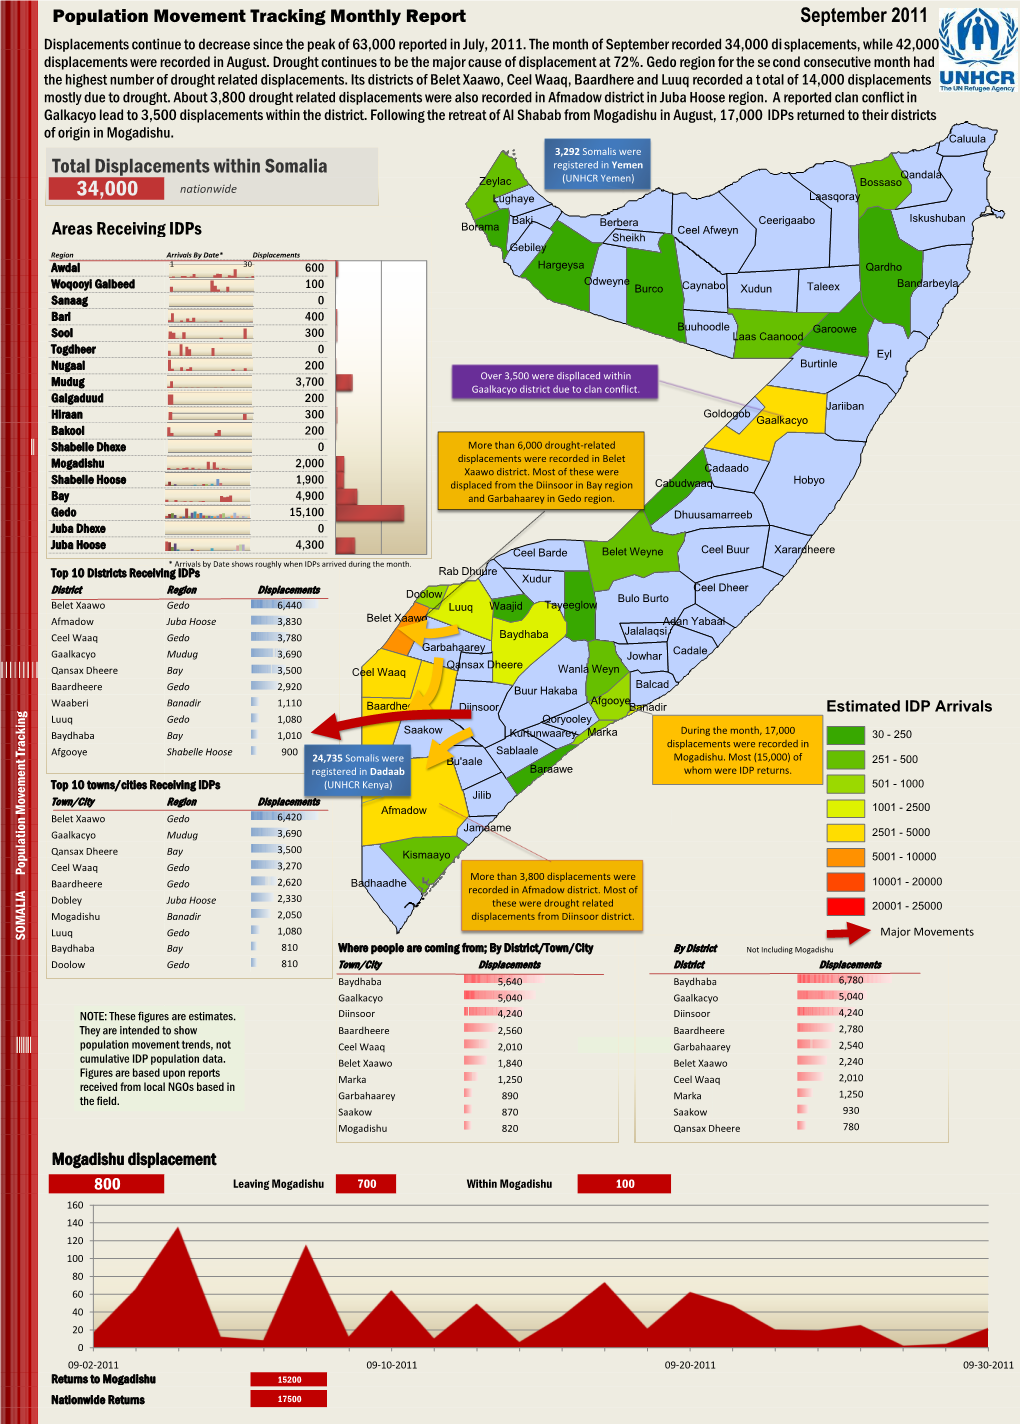 September 2011 Total Displacements Within Somalia